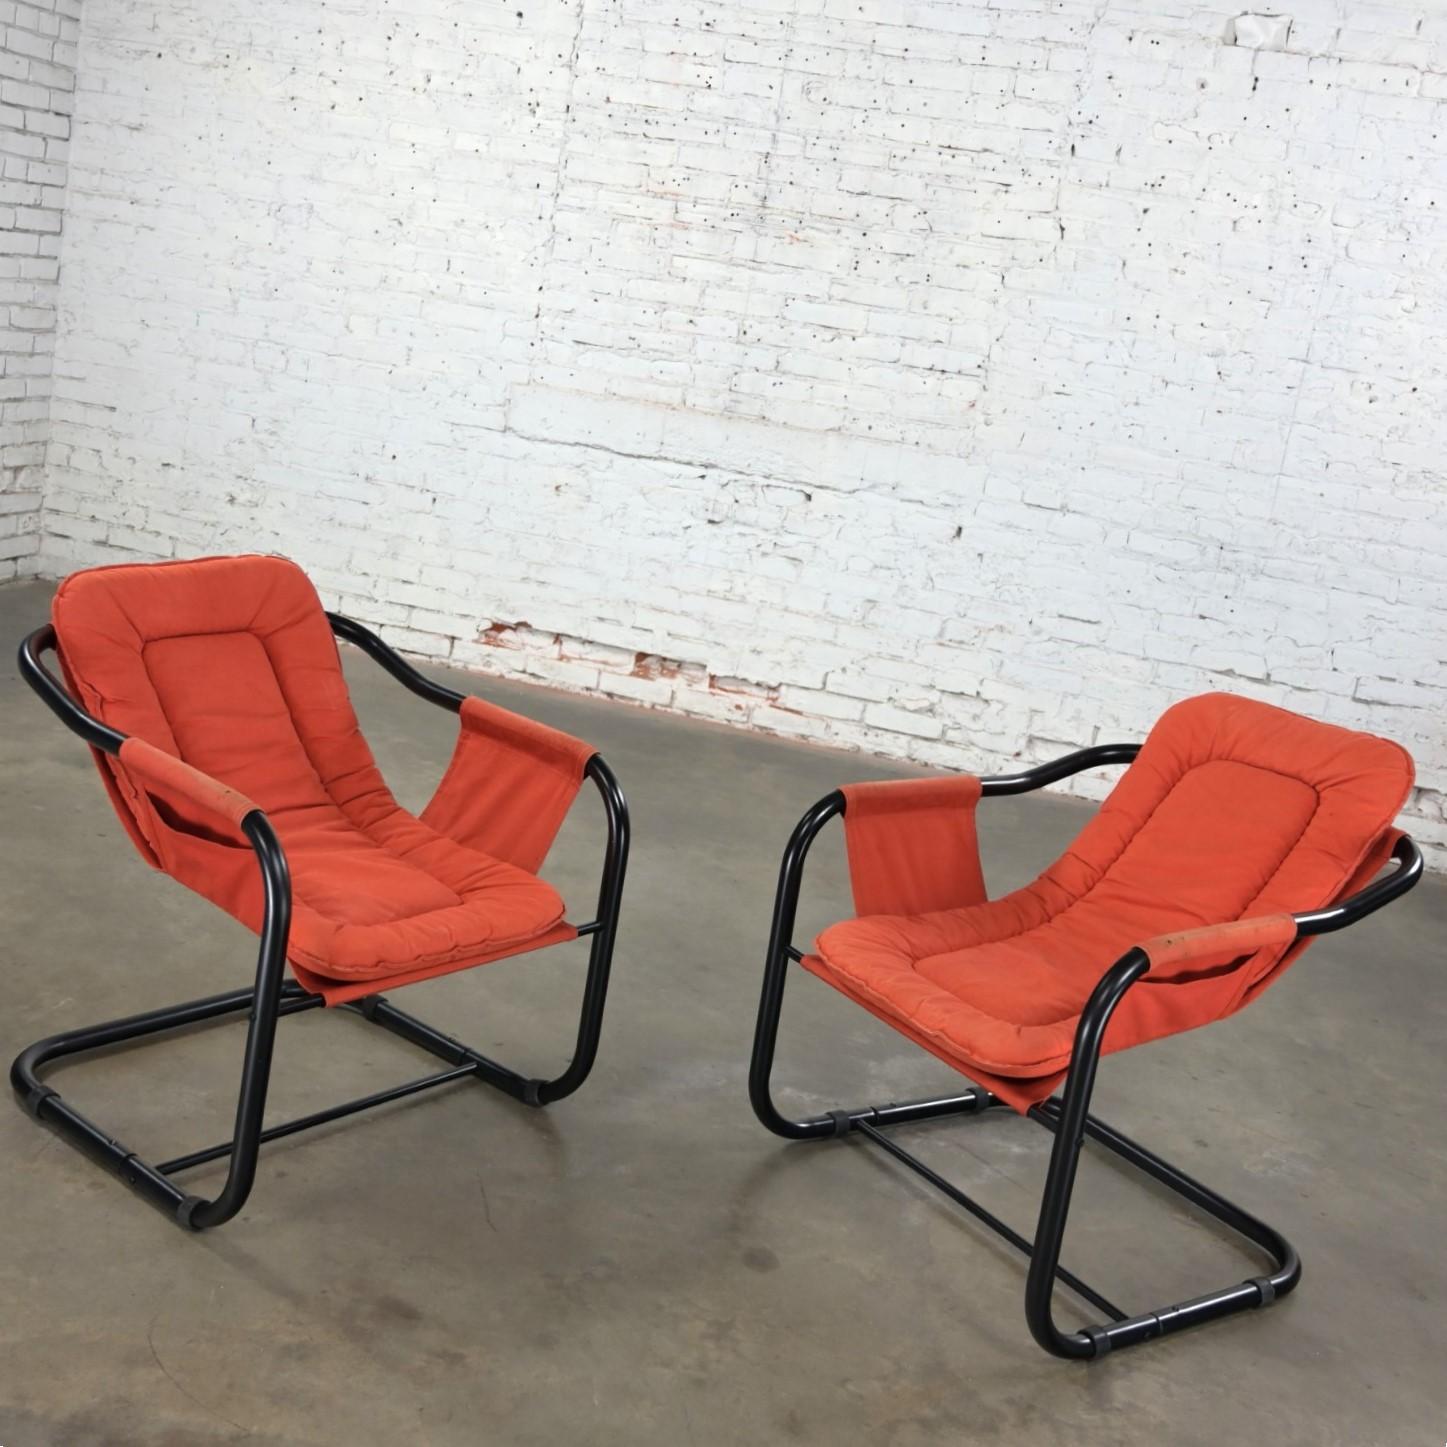 Unknown 1970’s Modern Orange & Black Tube Cantilever Sling Lounge Chairs Jerry Johnson S For Sale